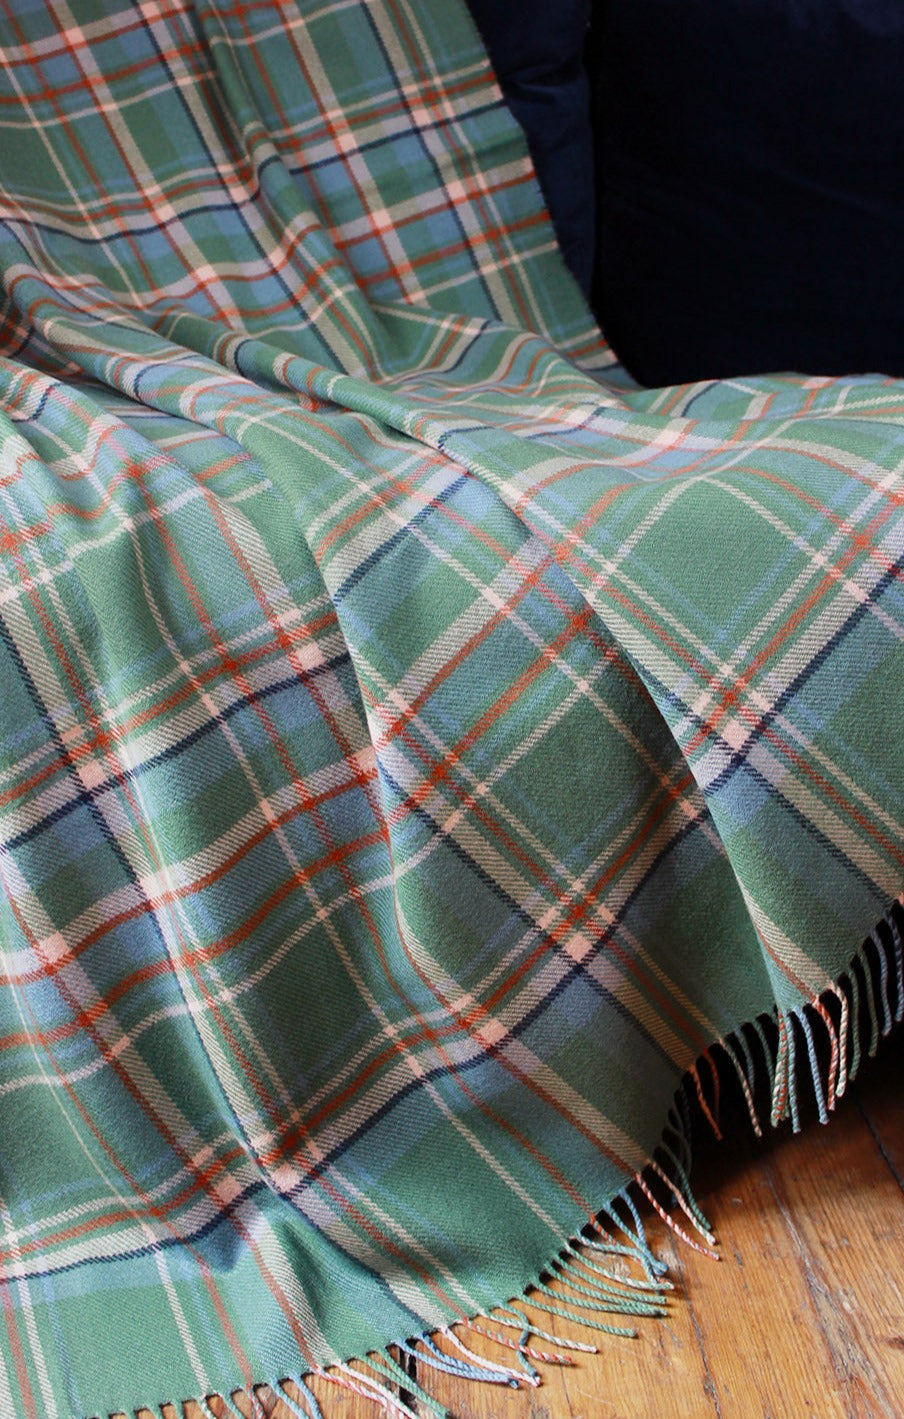 Limited edition Highlands at Dawn lambswool blanket features an original plaid design by Araminta Campbell